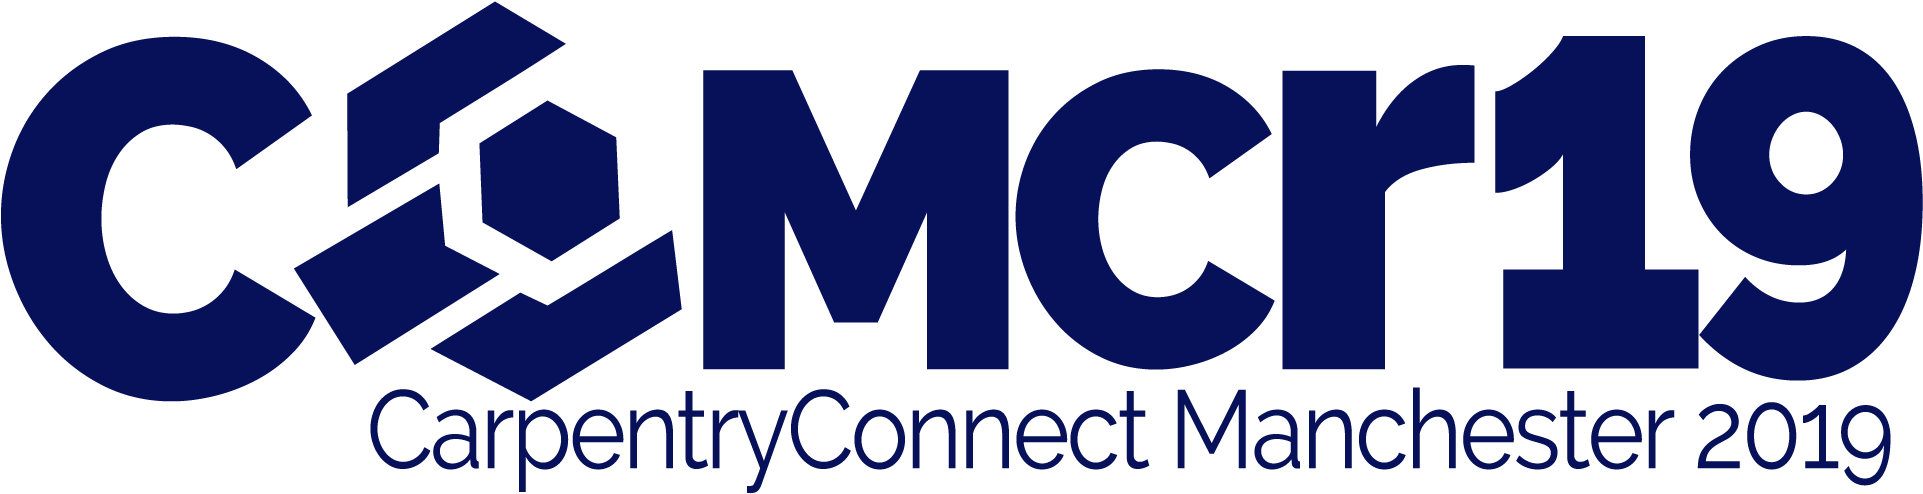 Carpentry Connect Manchester2019 Logo